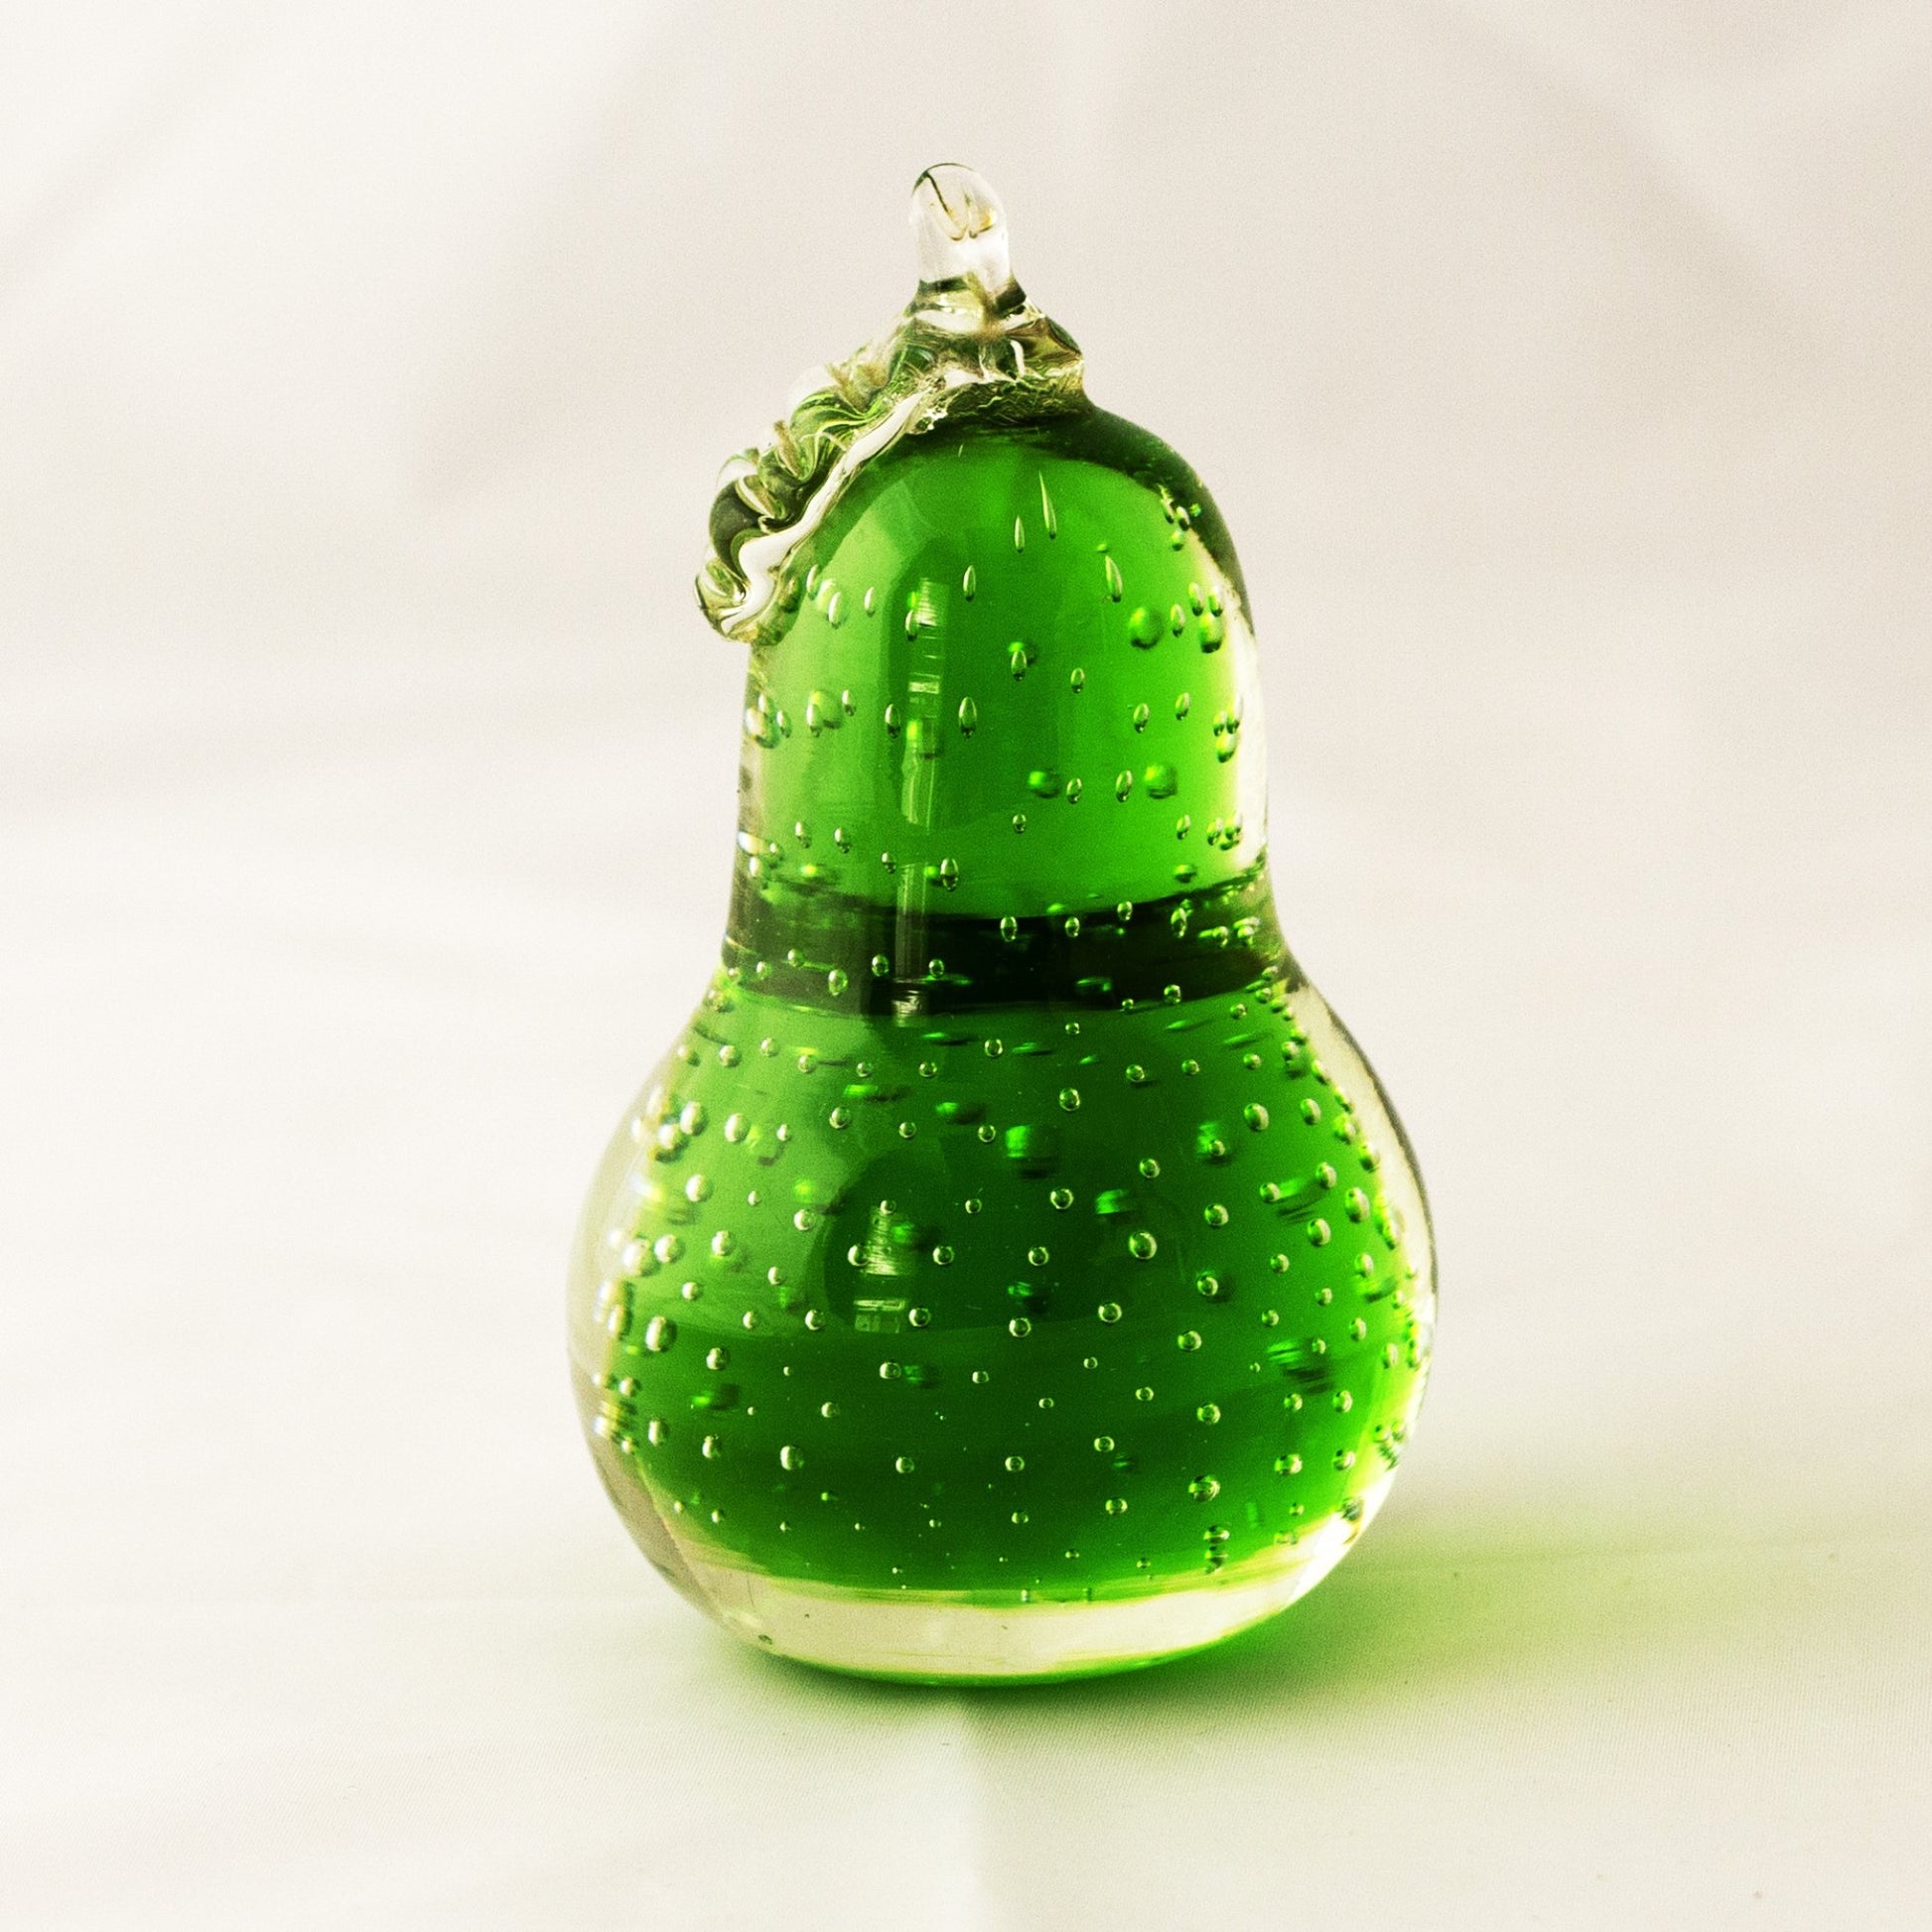 ART GLASS GREEN PEAR CONTROLLED BUBBLE PAPERWEIGHT